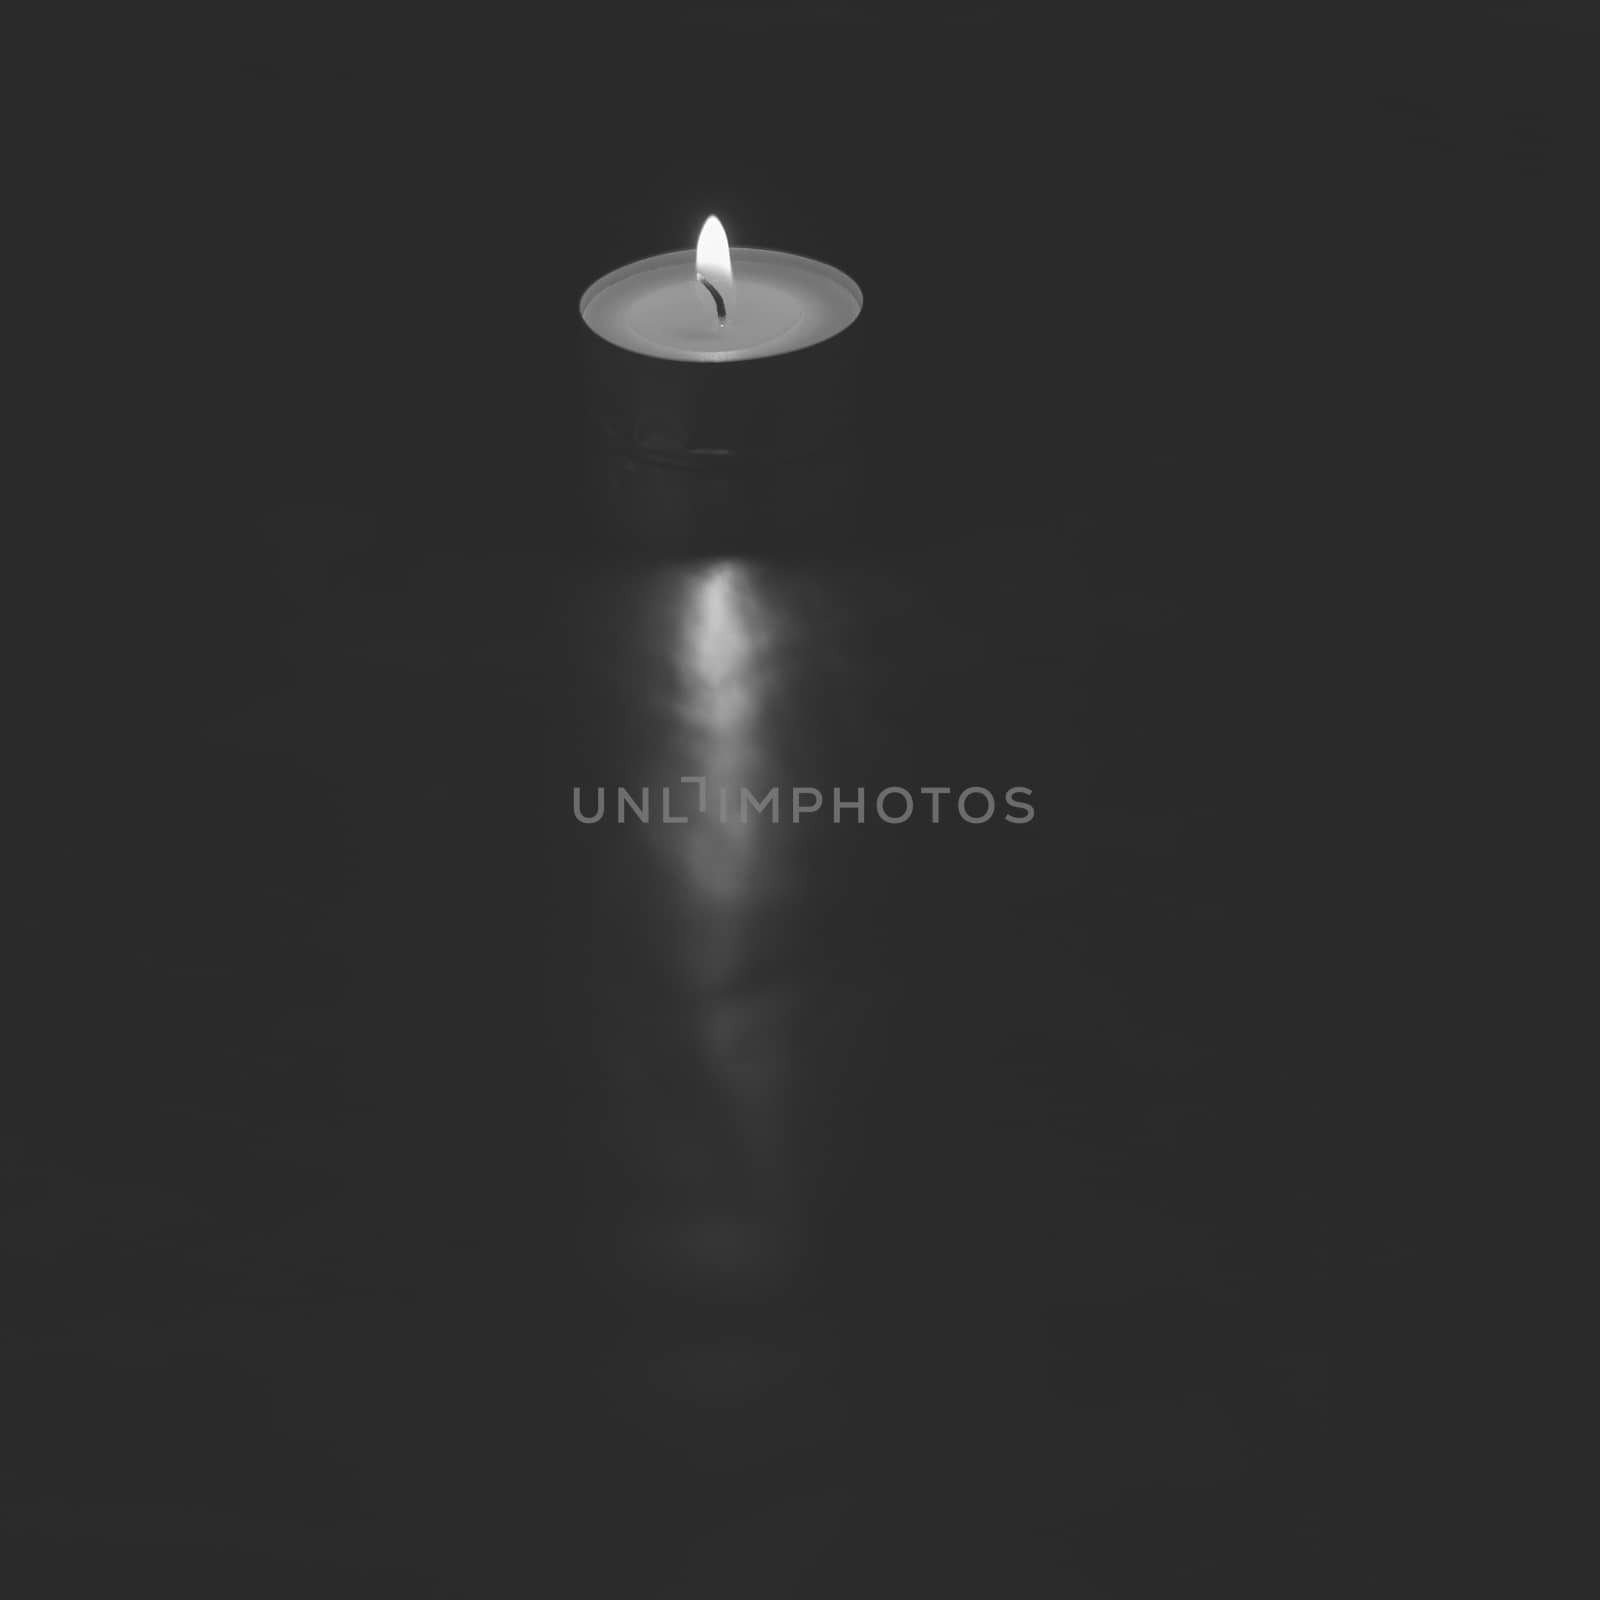 Small lit candle on dark and silver background by raul_ruiz